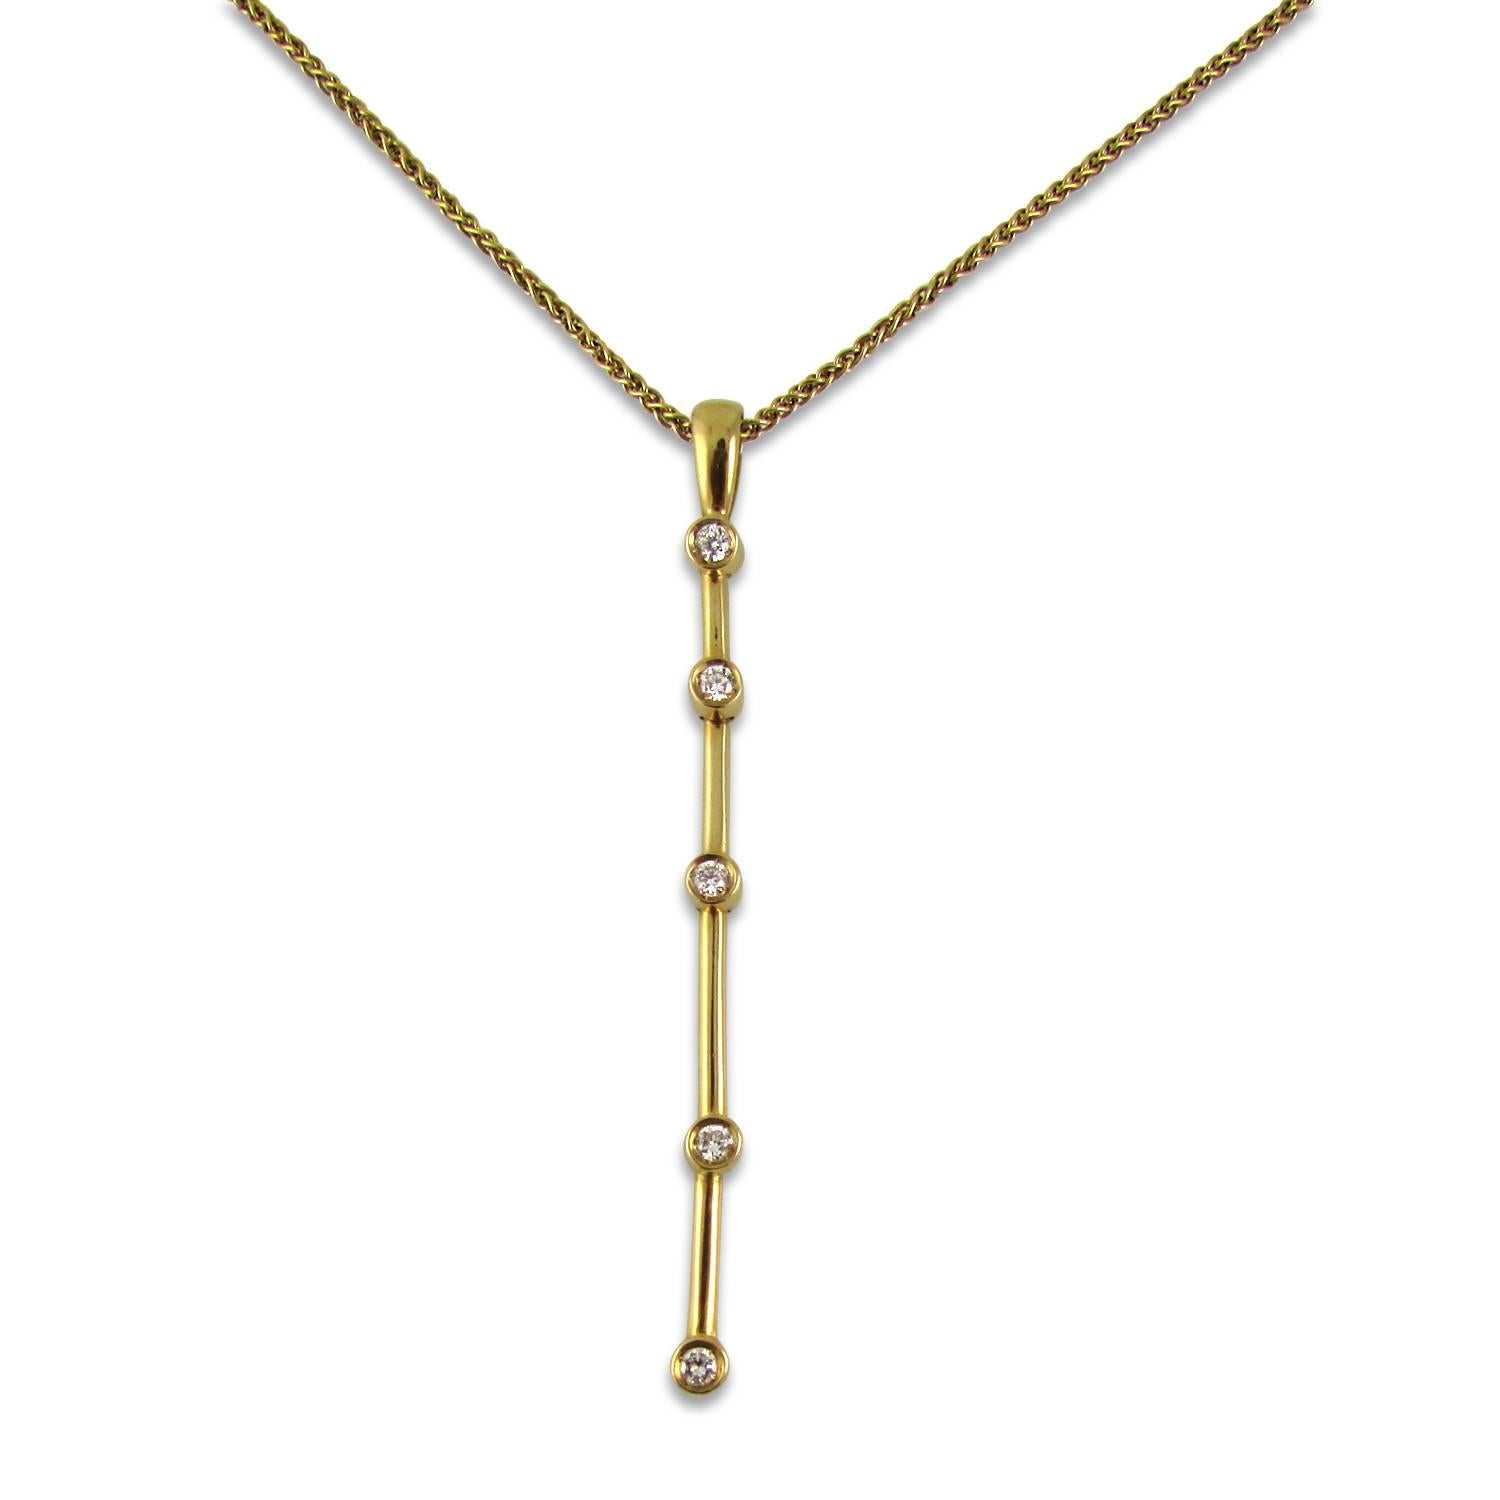  18KT yellow gold and diamond pendant bezel-set with 5 round diamonds. Pendant is 2.25 inches long and comes on a 20 inch 14KT yellow gold Italian chain. Pendant is signed Ilias Lalaounis Greece. 